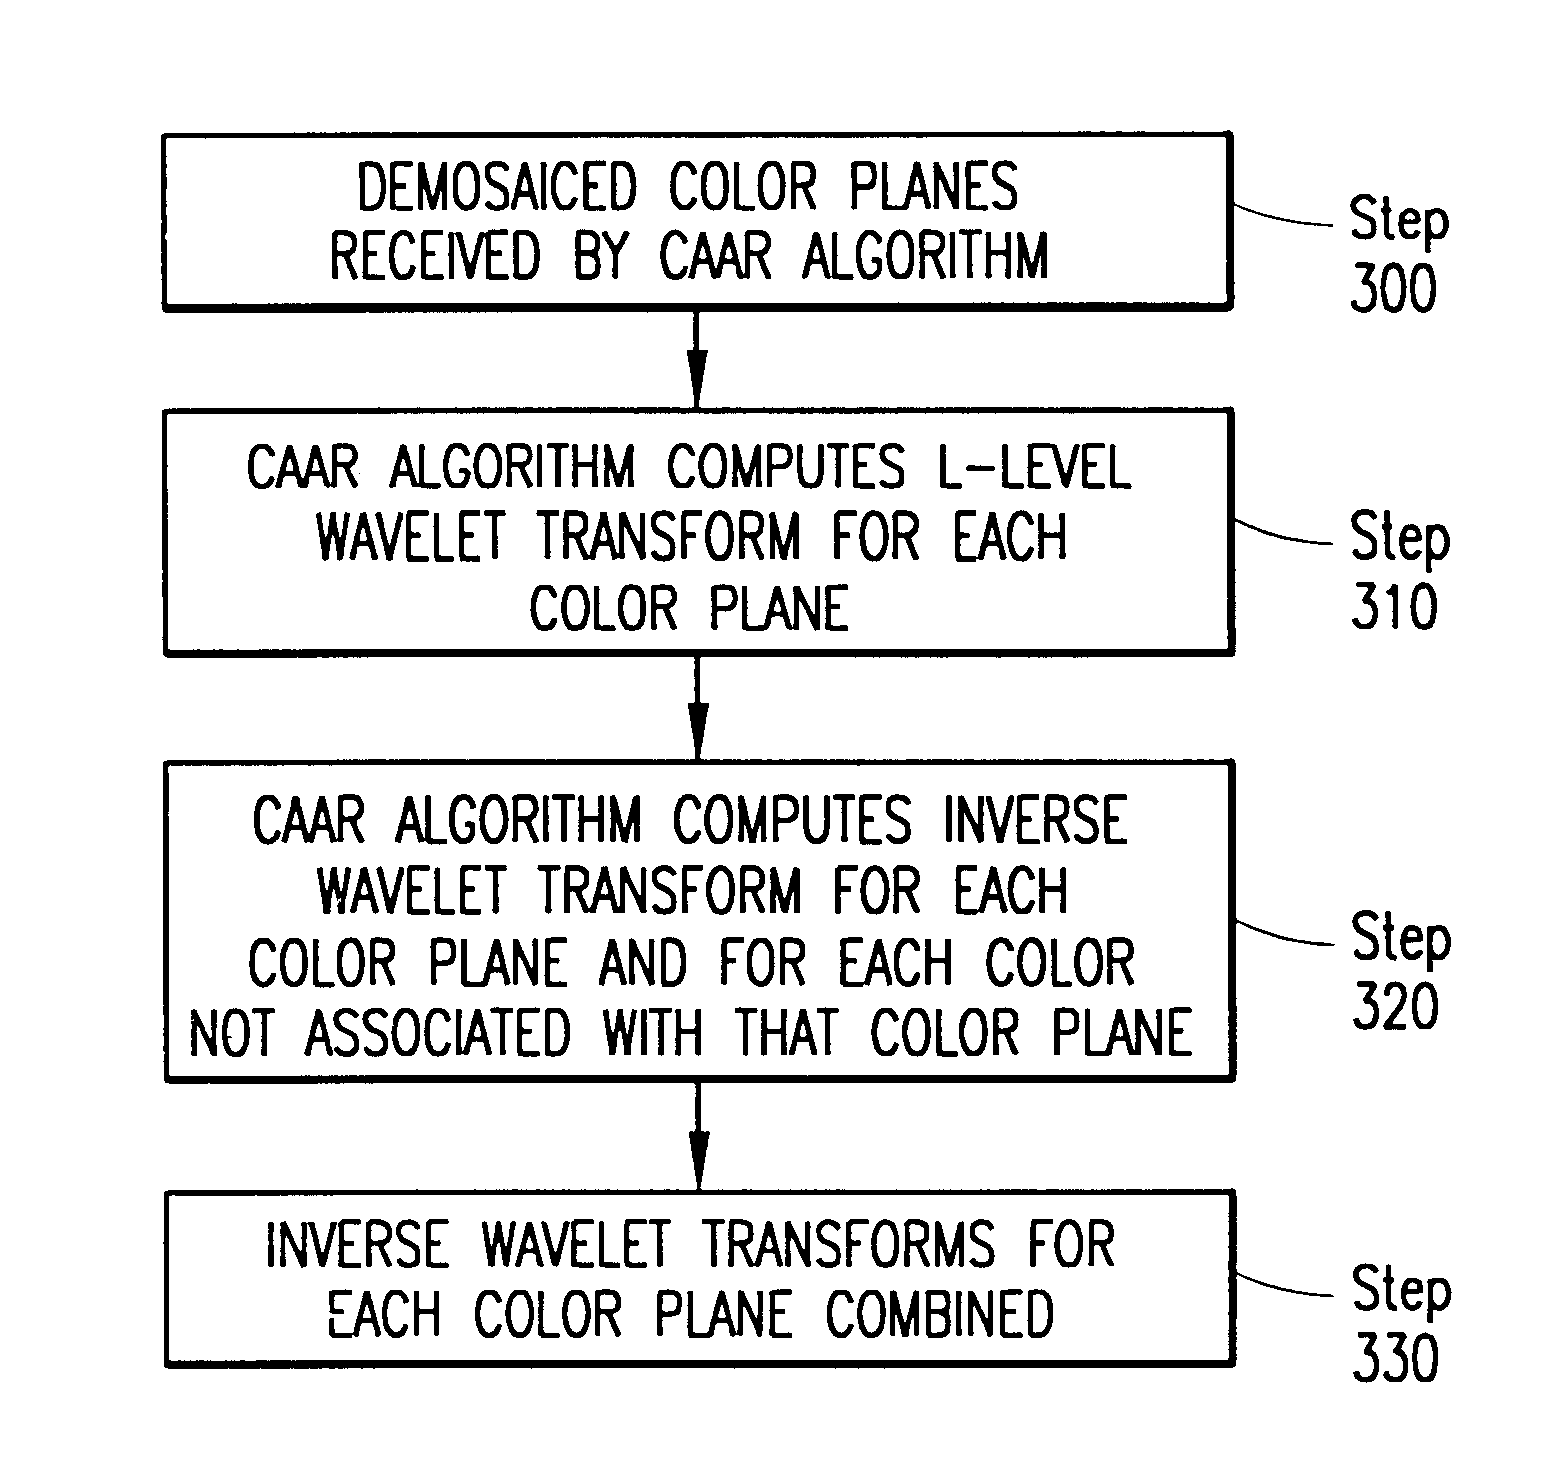 System and method for processing demosaiced images to reduce color aliasing artifacts